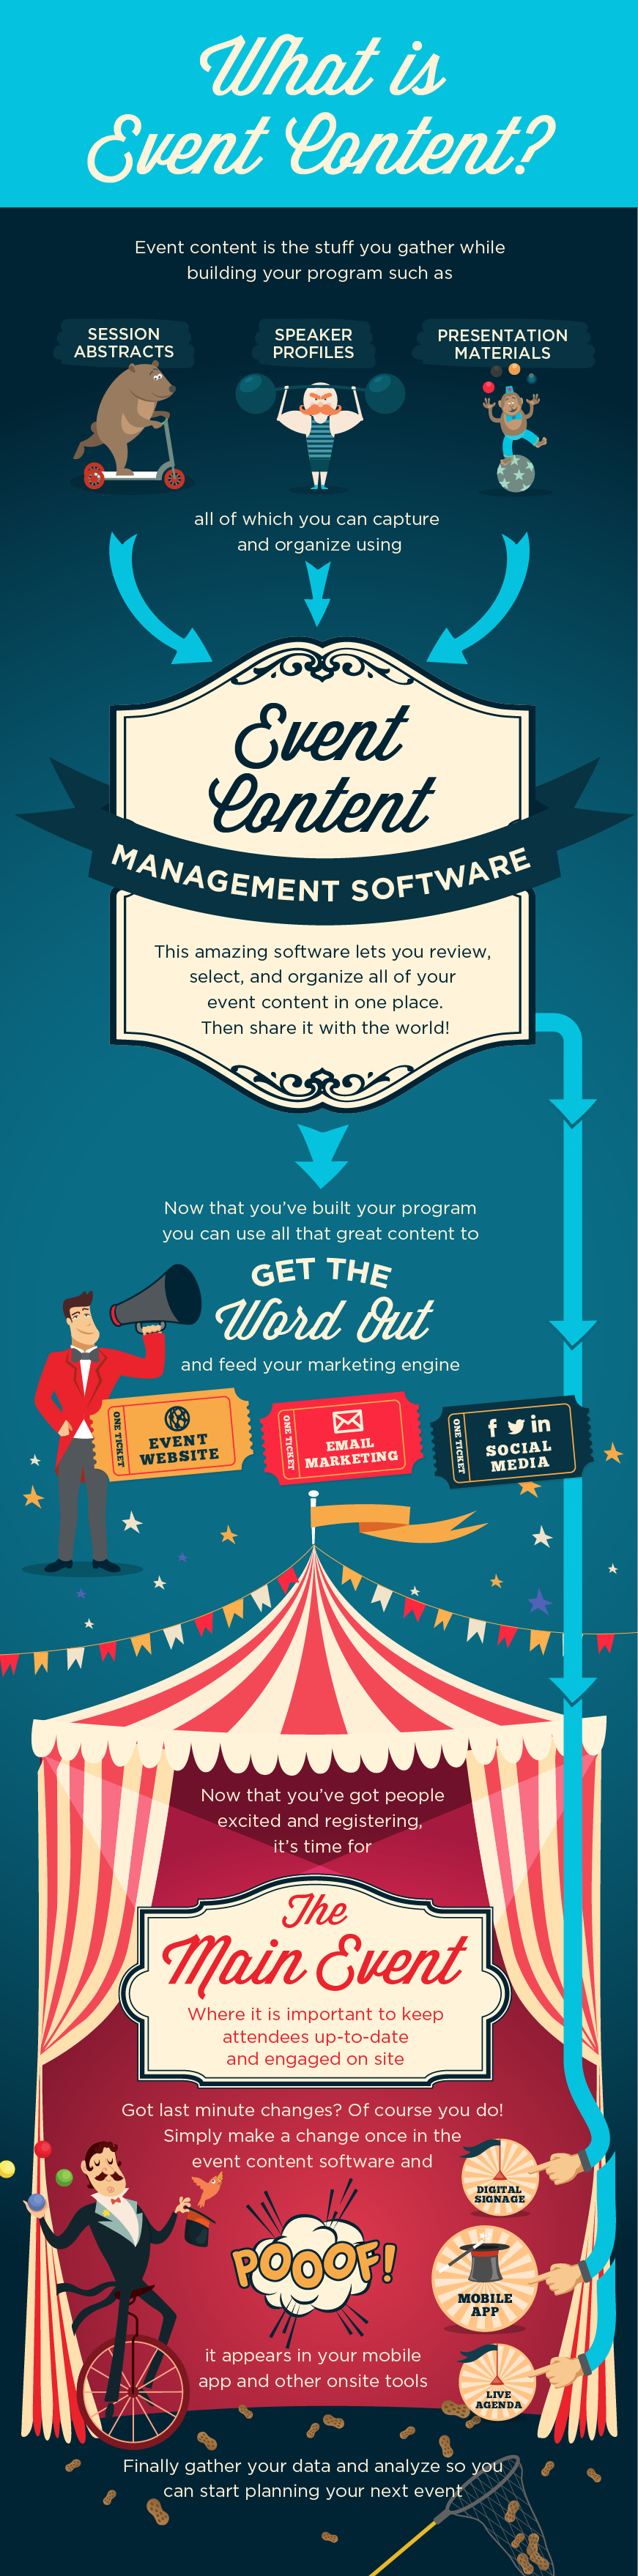 Hubb - What Is Event Content Infographic